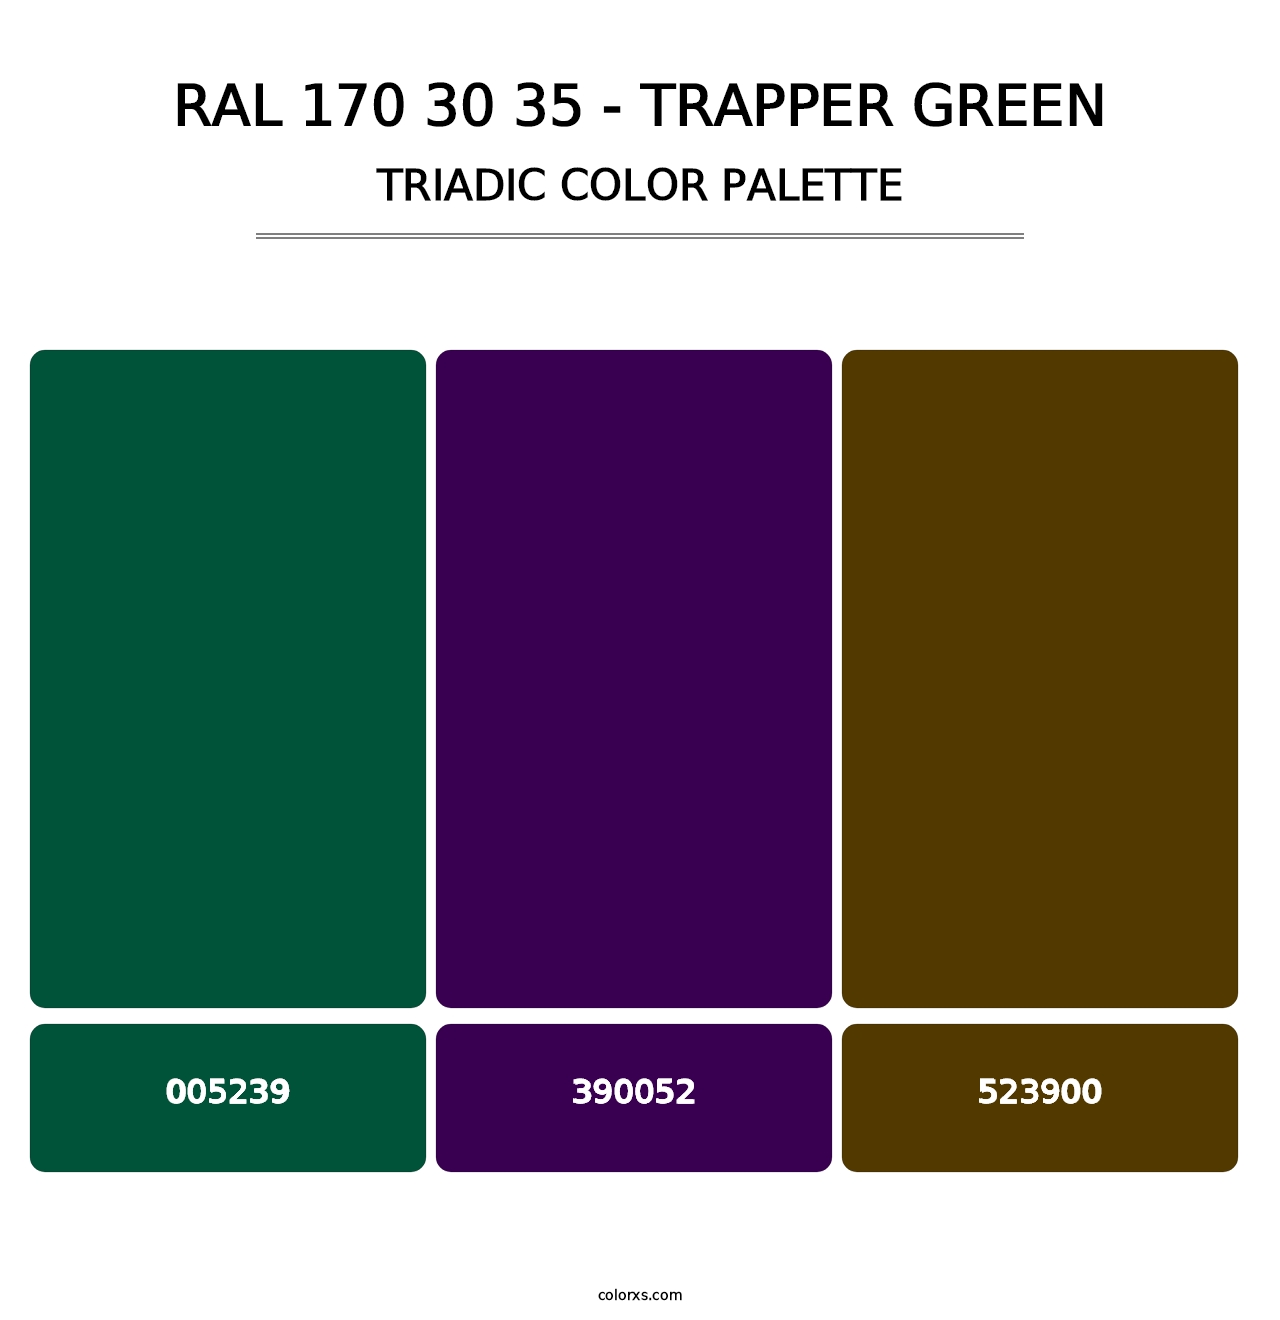 RAL 170 30 35 - Trapper Green - Triadic Color Palette